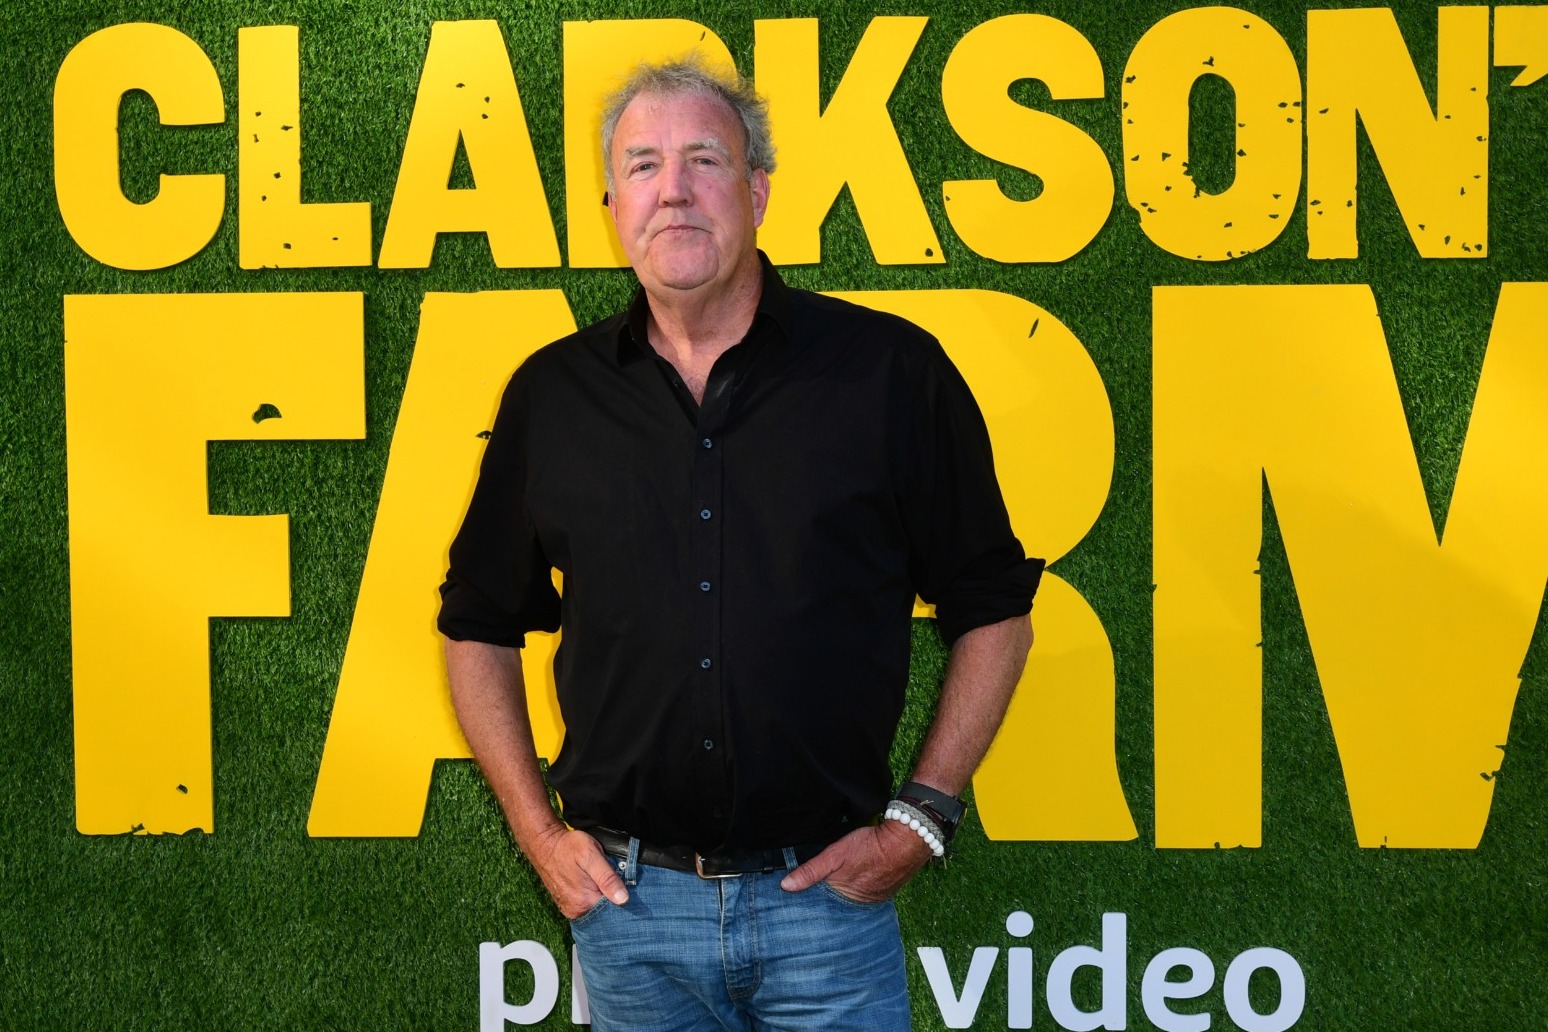 Jeremy Clarkson’s Meghan column does not impact ITV brand, says chief executive 